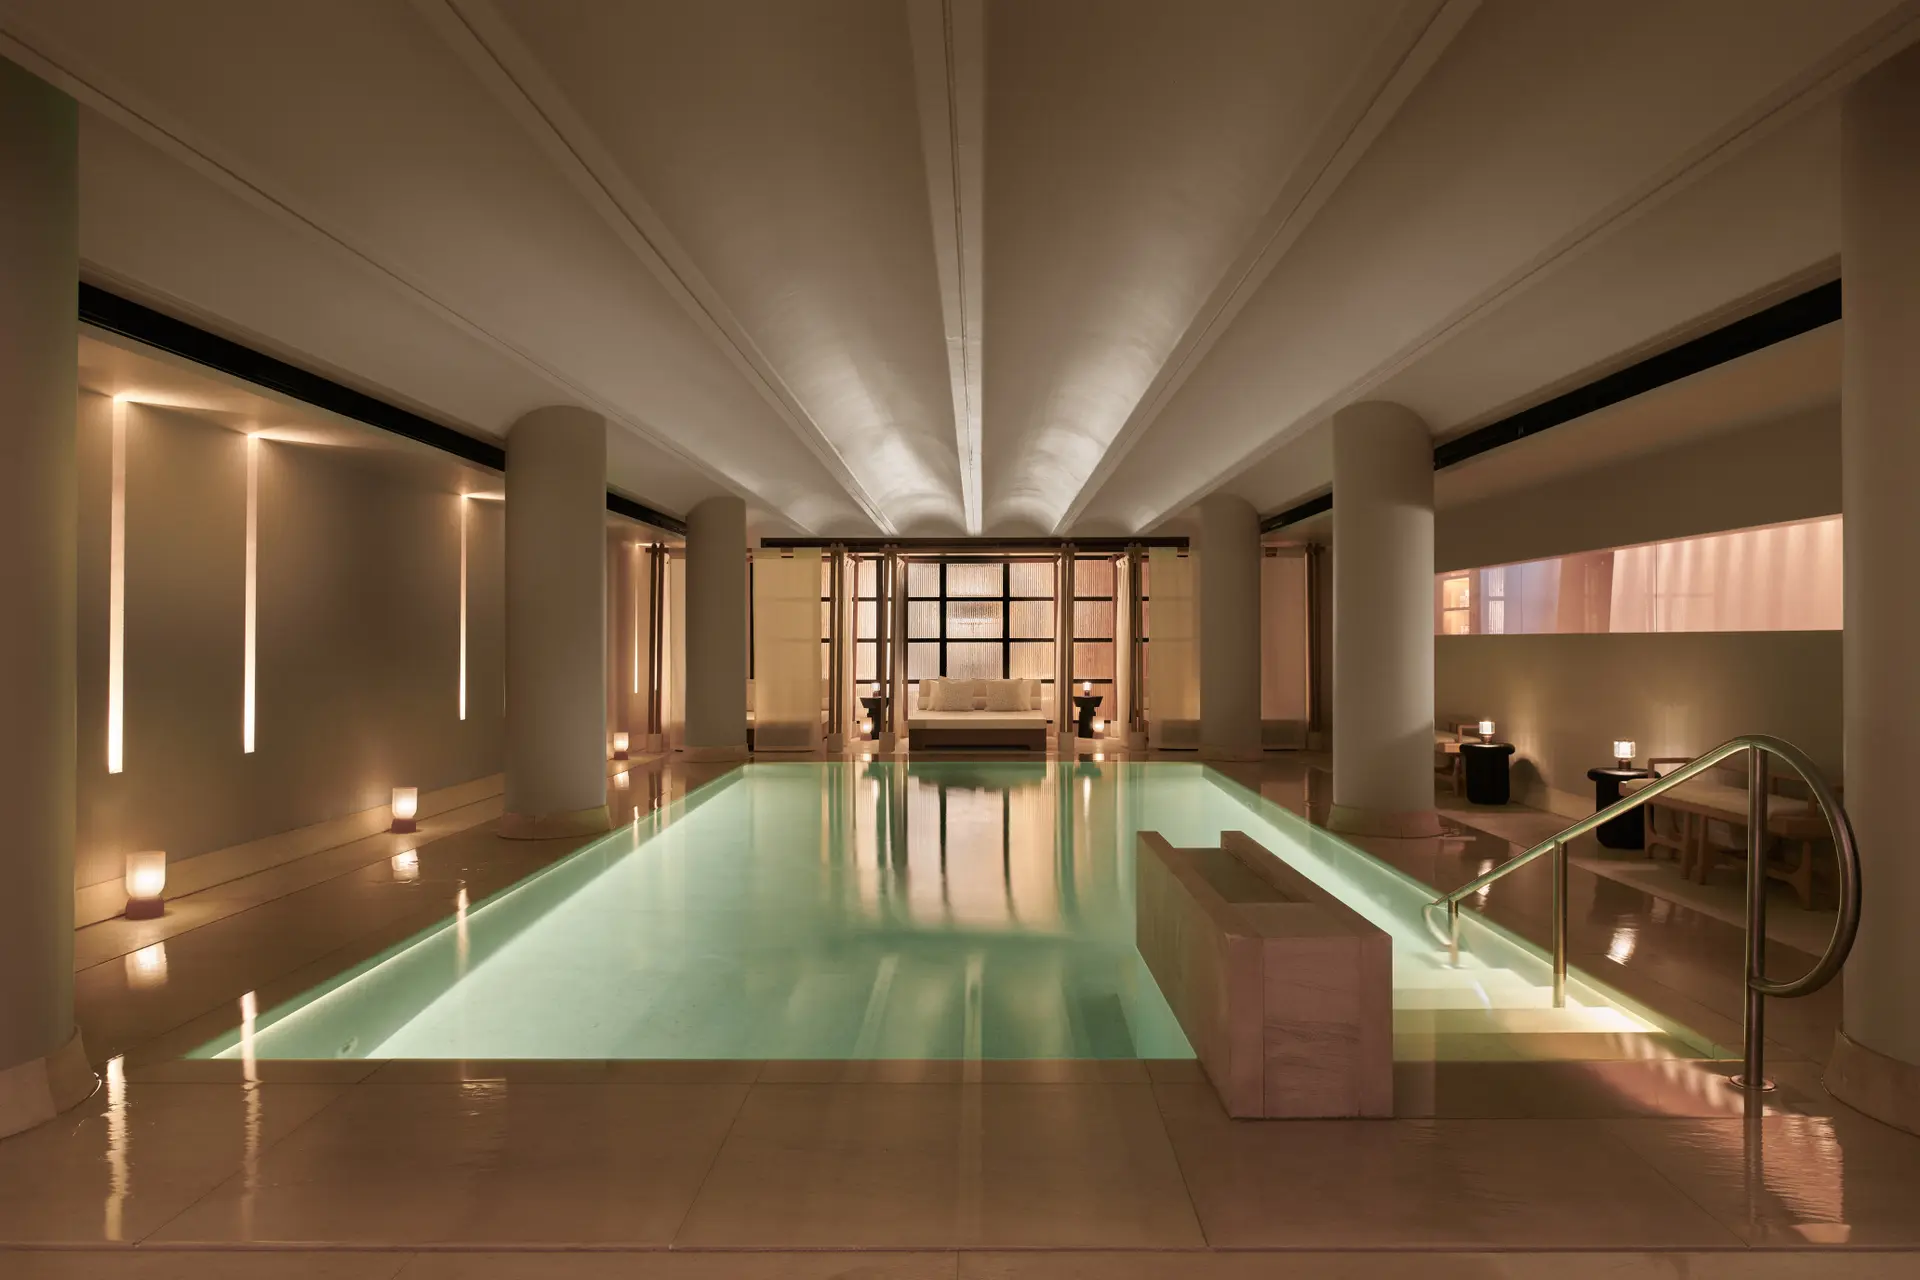 Hotels News - Claridge's opens first ever spa - and it's way underground!